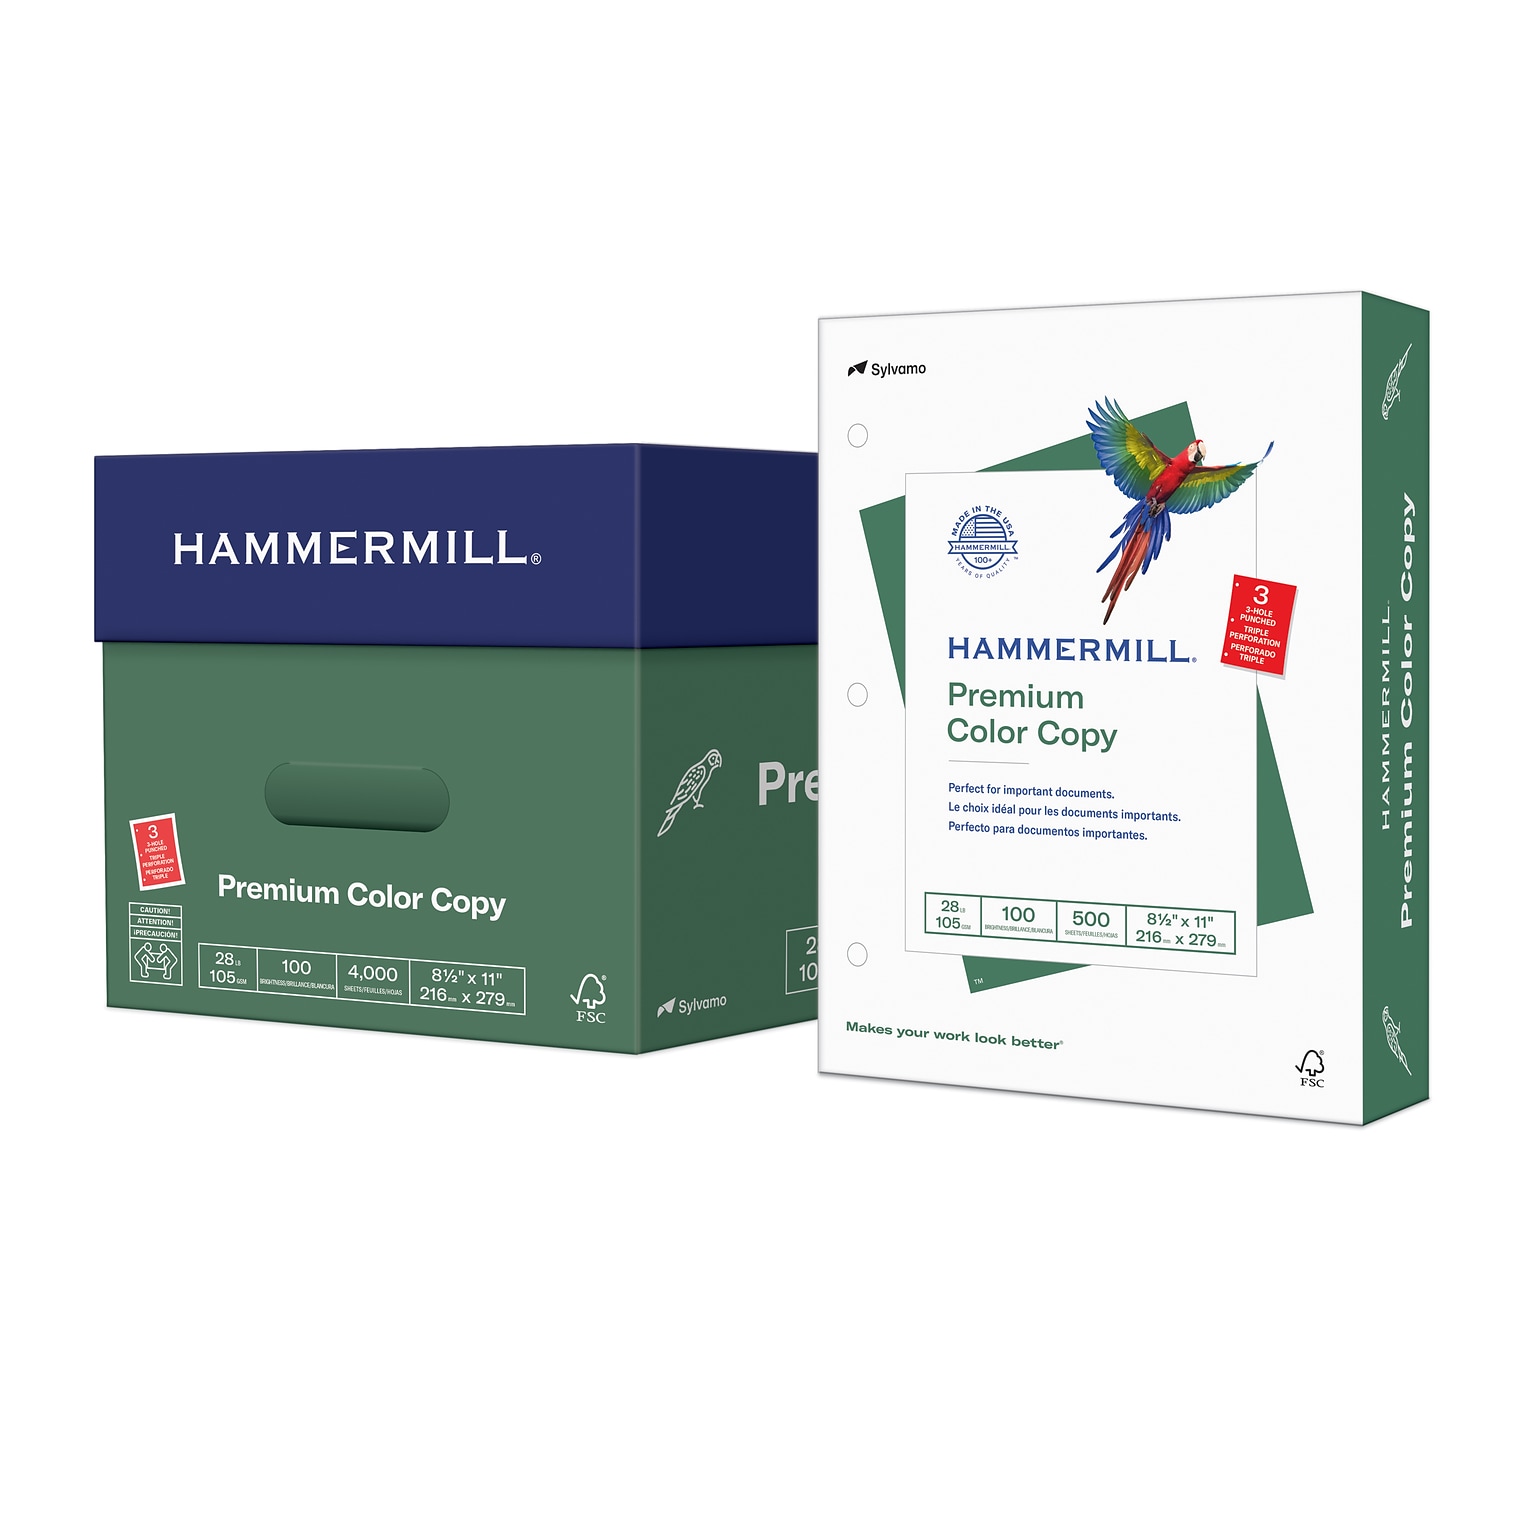 Hammermill Premium 8.5 x 11 3-Hole Punched Color Copy Paper, 28 lbs., 100 Brightness, 500 Sheets/Ream, 8 Reams/Carton (102500)